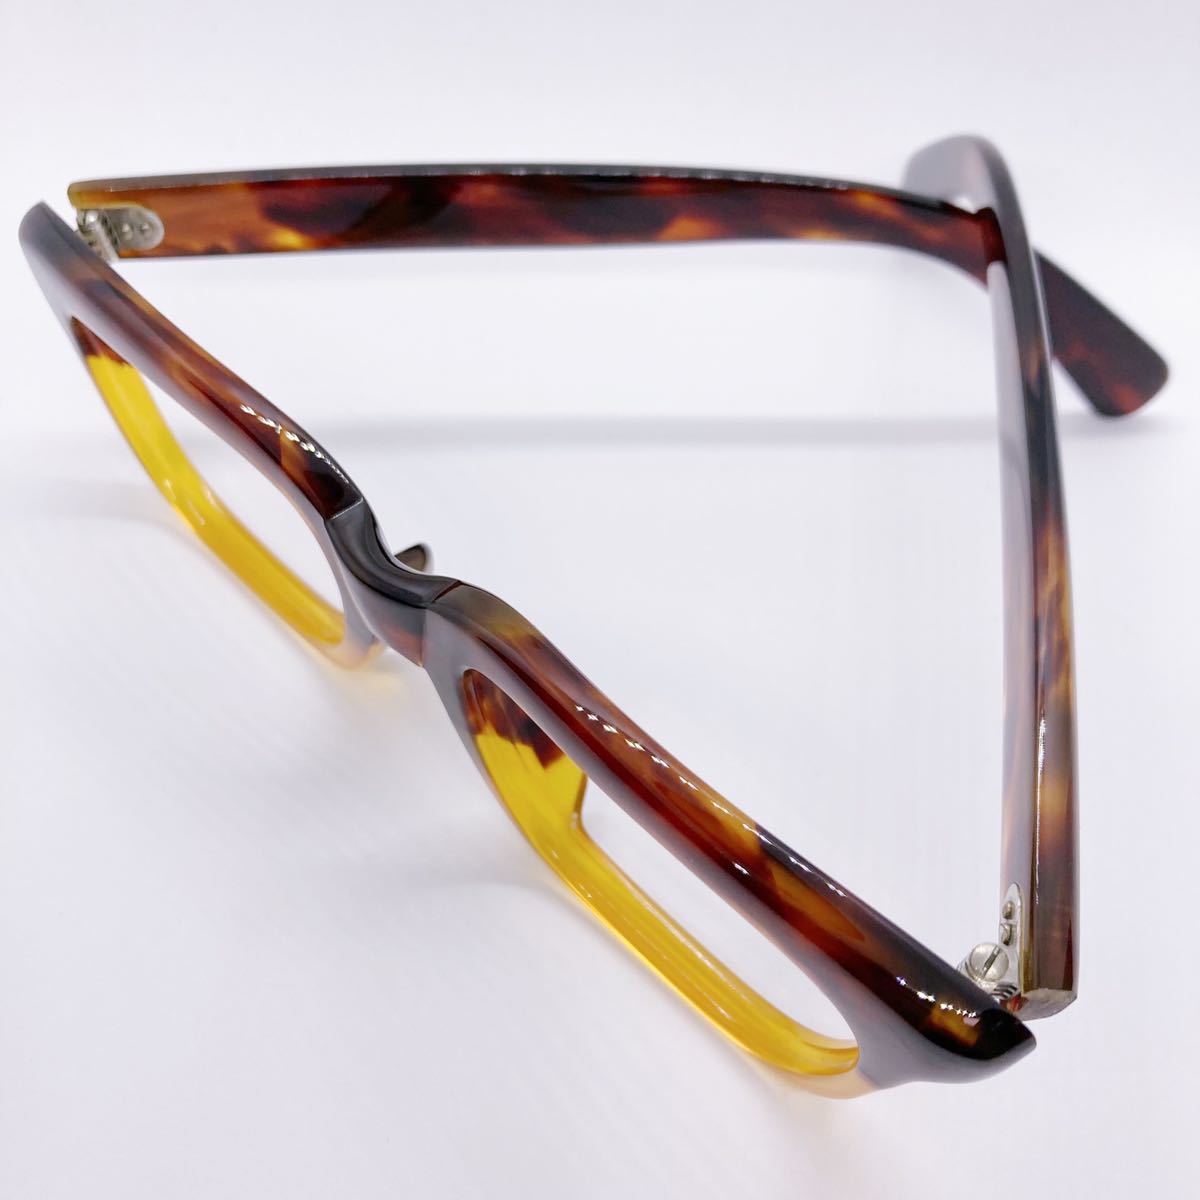 book@ tortoise shell 80 period glasses we Lynn ton dead stock Vintage made in Japan domestic production Crown punt Vintage glasses frame France 